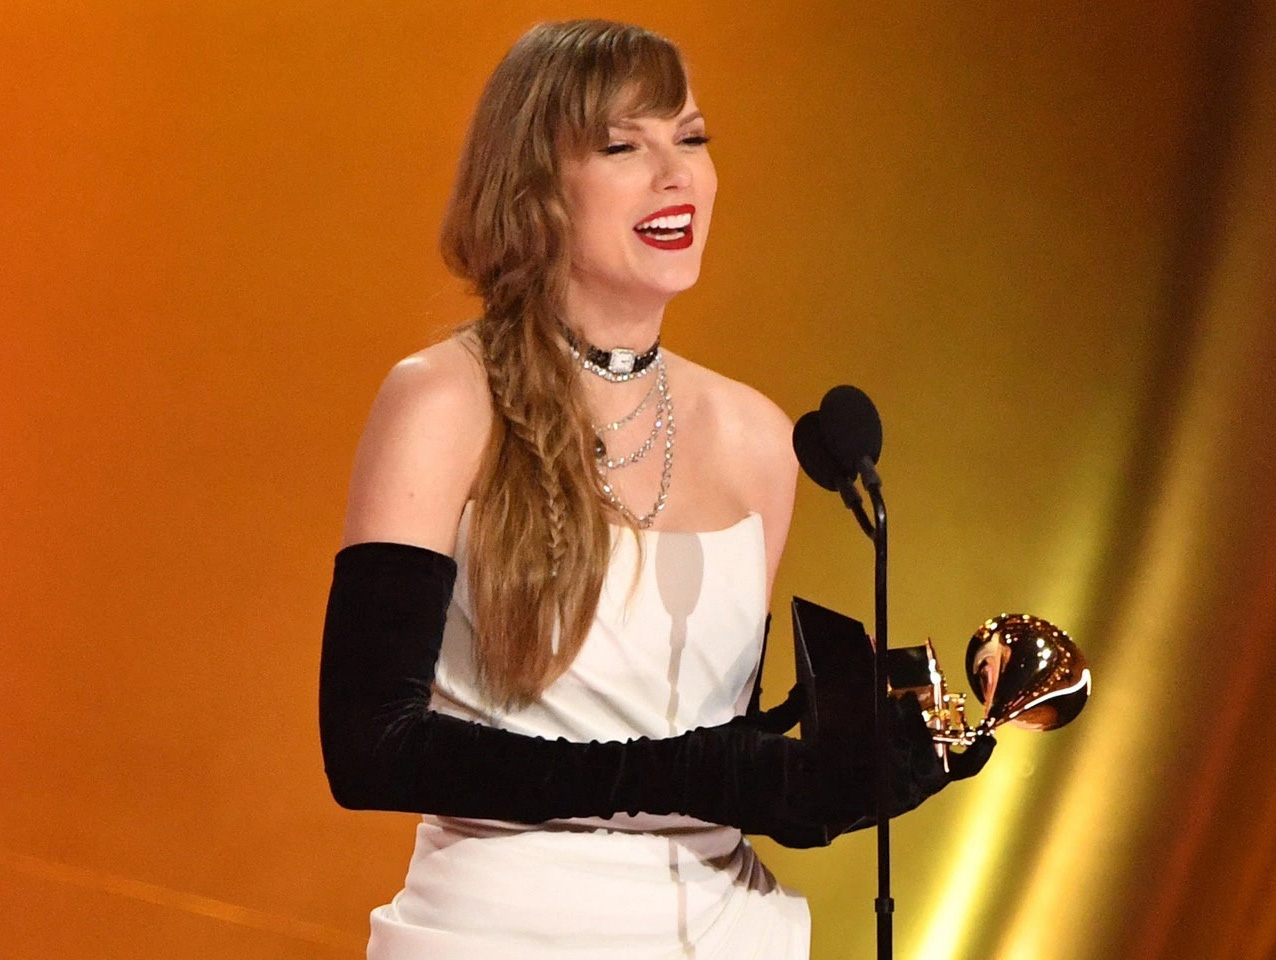 Taylor Swift received the award for Best Pop Album - Photo: Getty Images